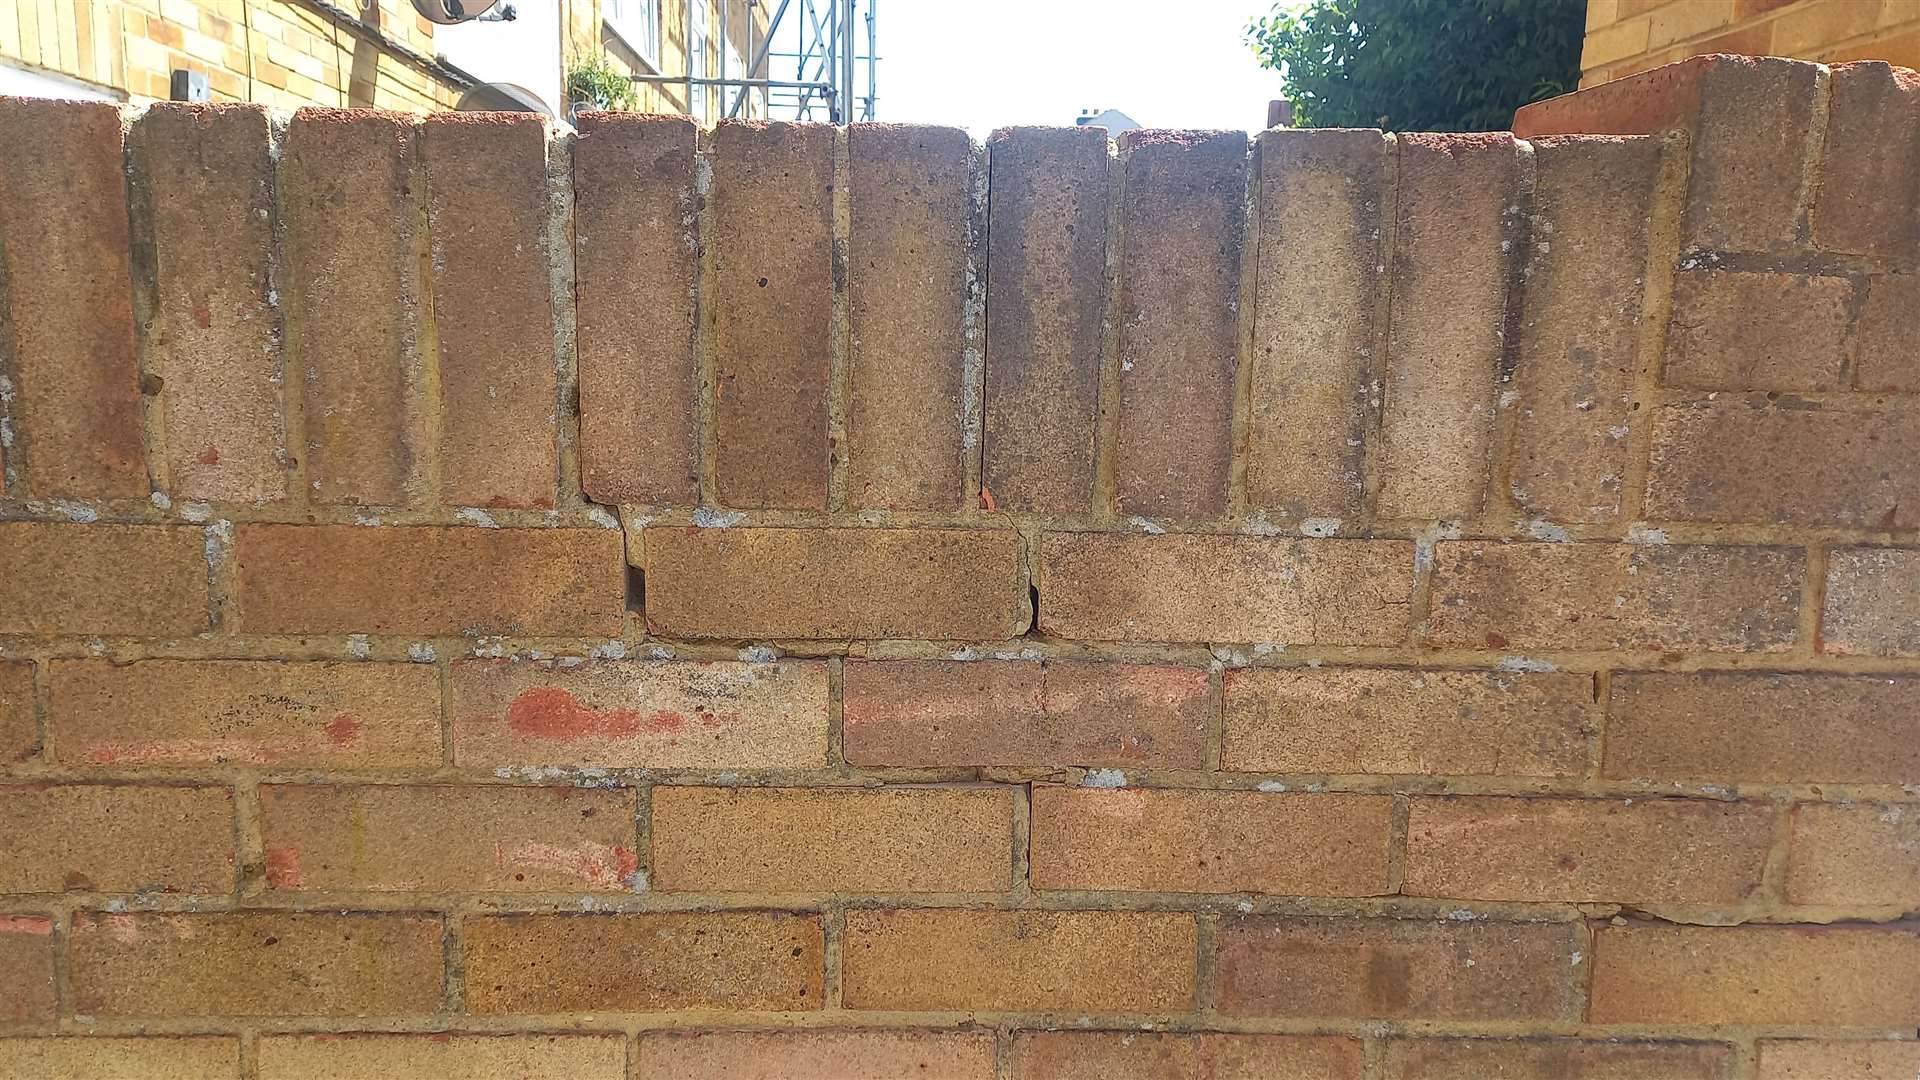 Residents fear the walls could go at any minute due to loose bricks throughout the structures. Picture: Marie Sandhu